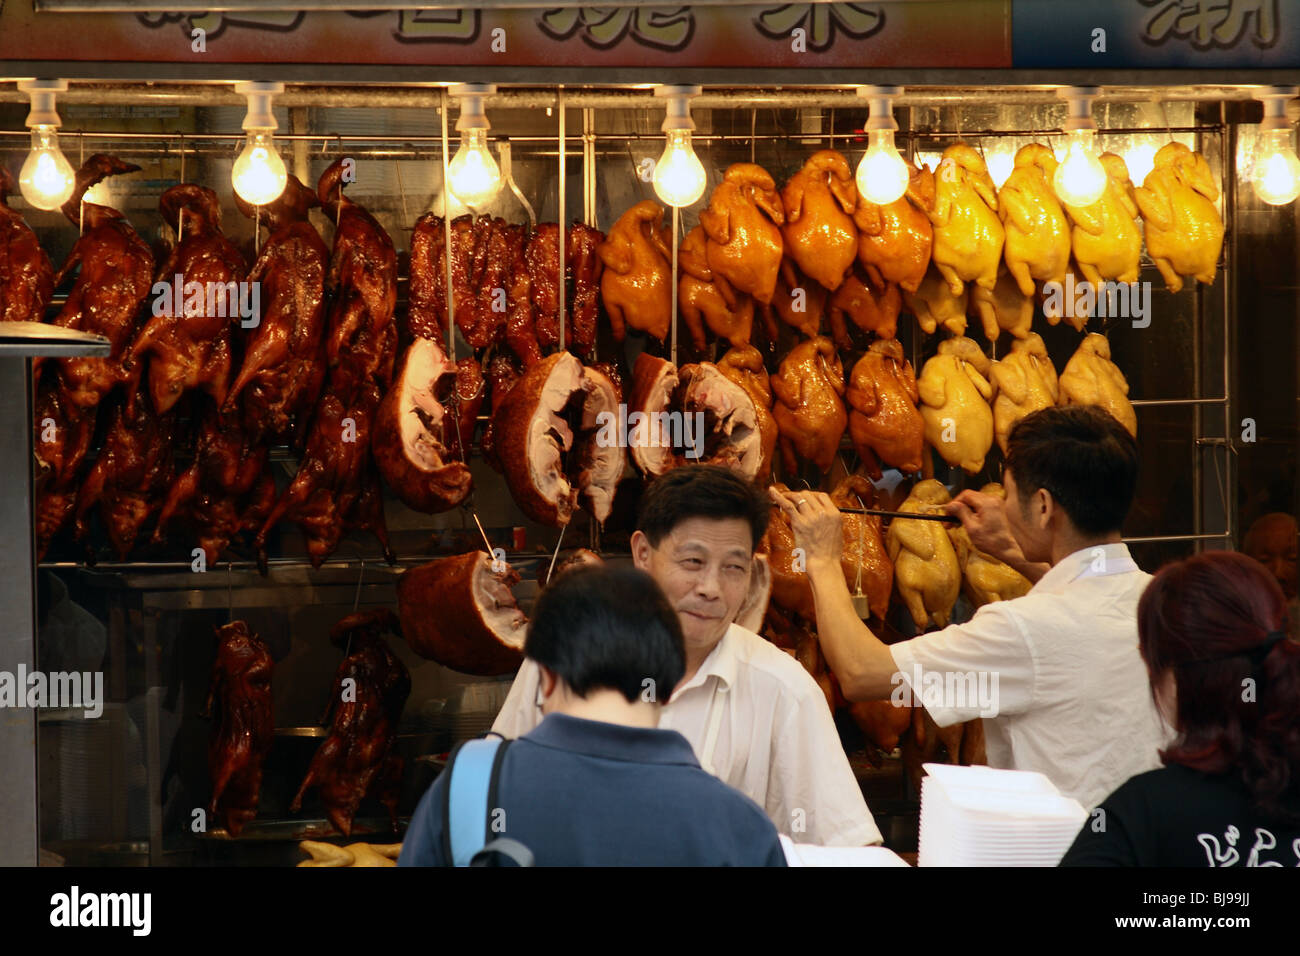 Restaurant in Hong Kong showing roasted duck peking style and roasted pork. Stock Photo